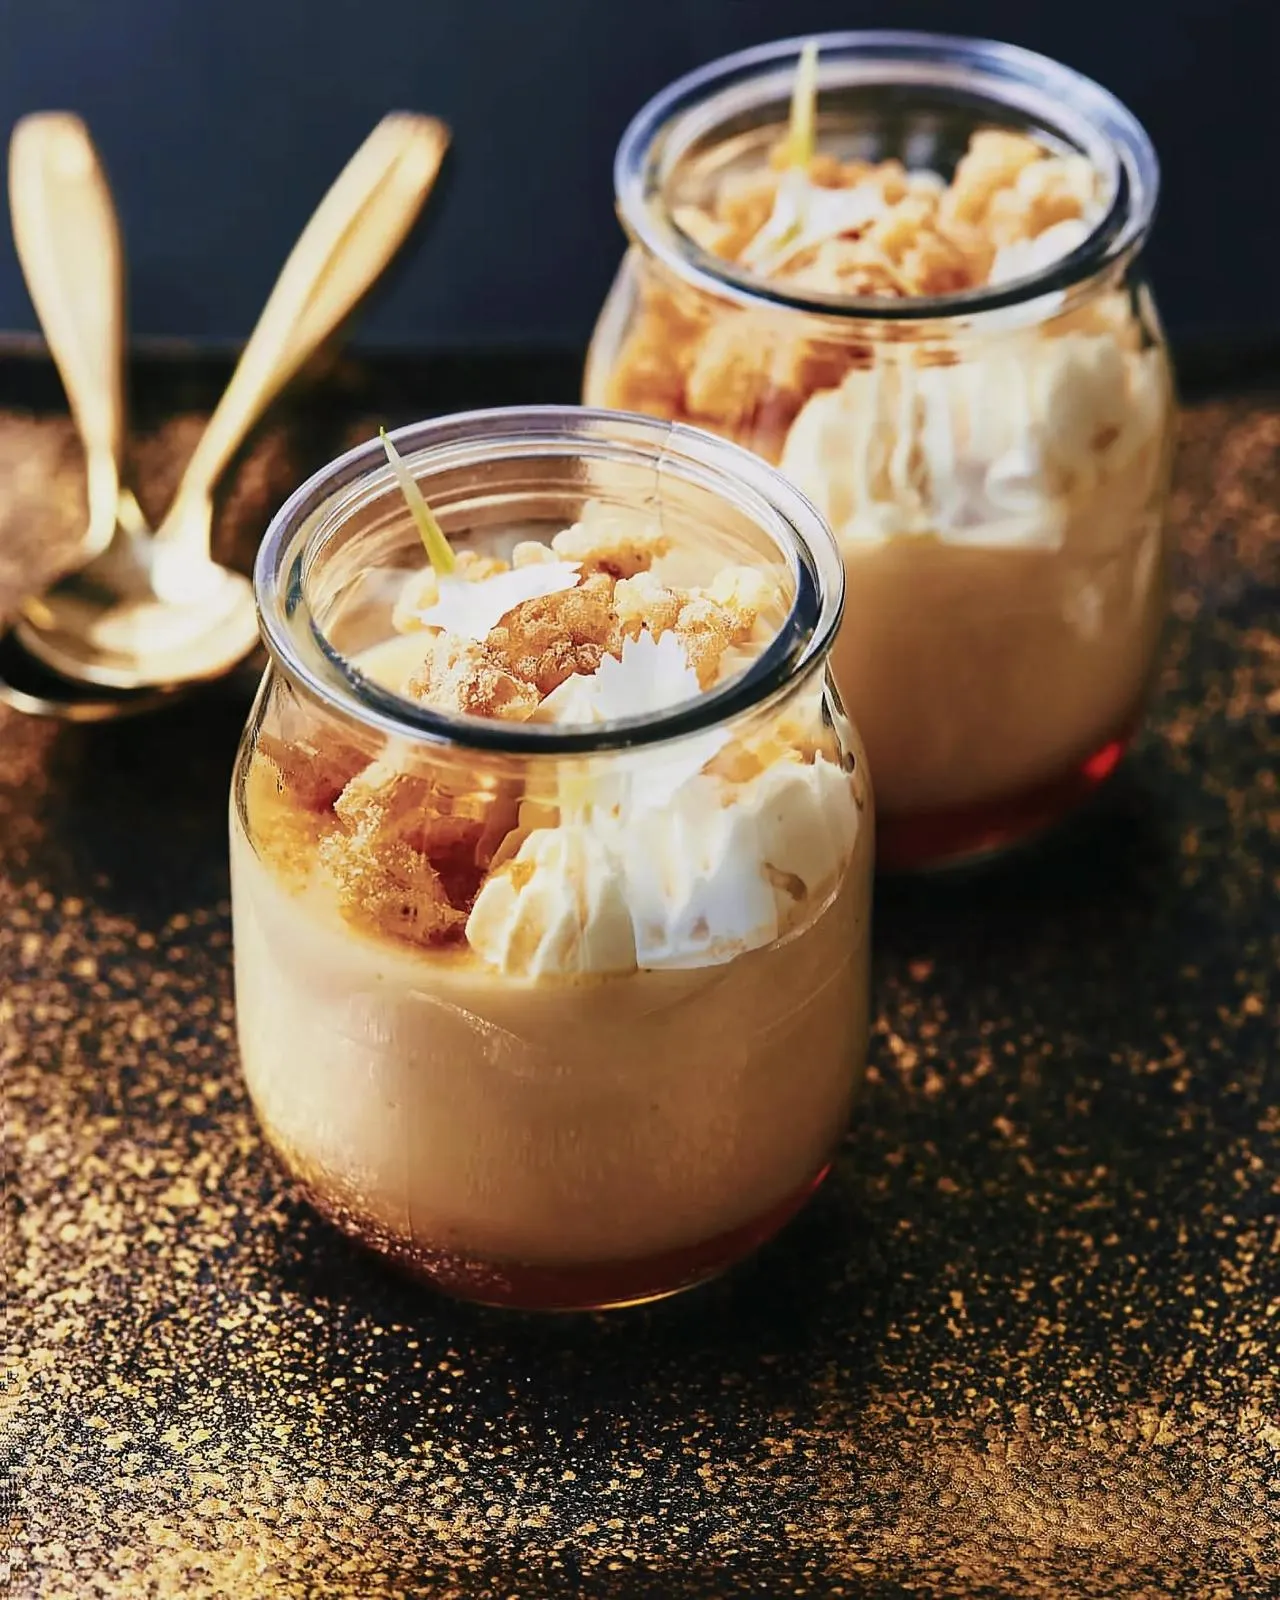 Close-up view of a delectable dessert served in a glass jar